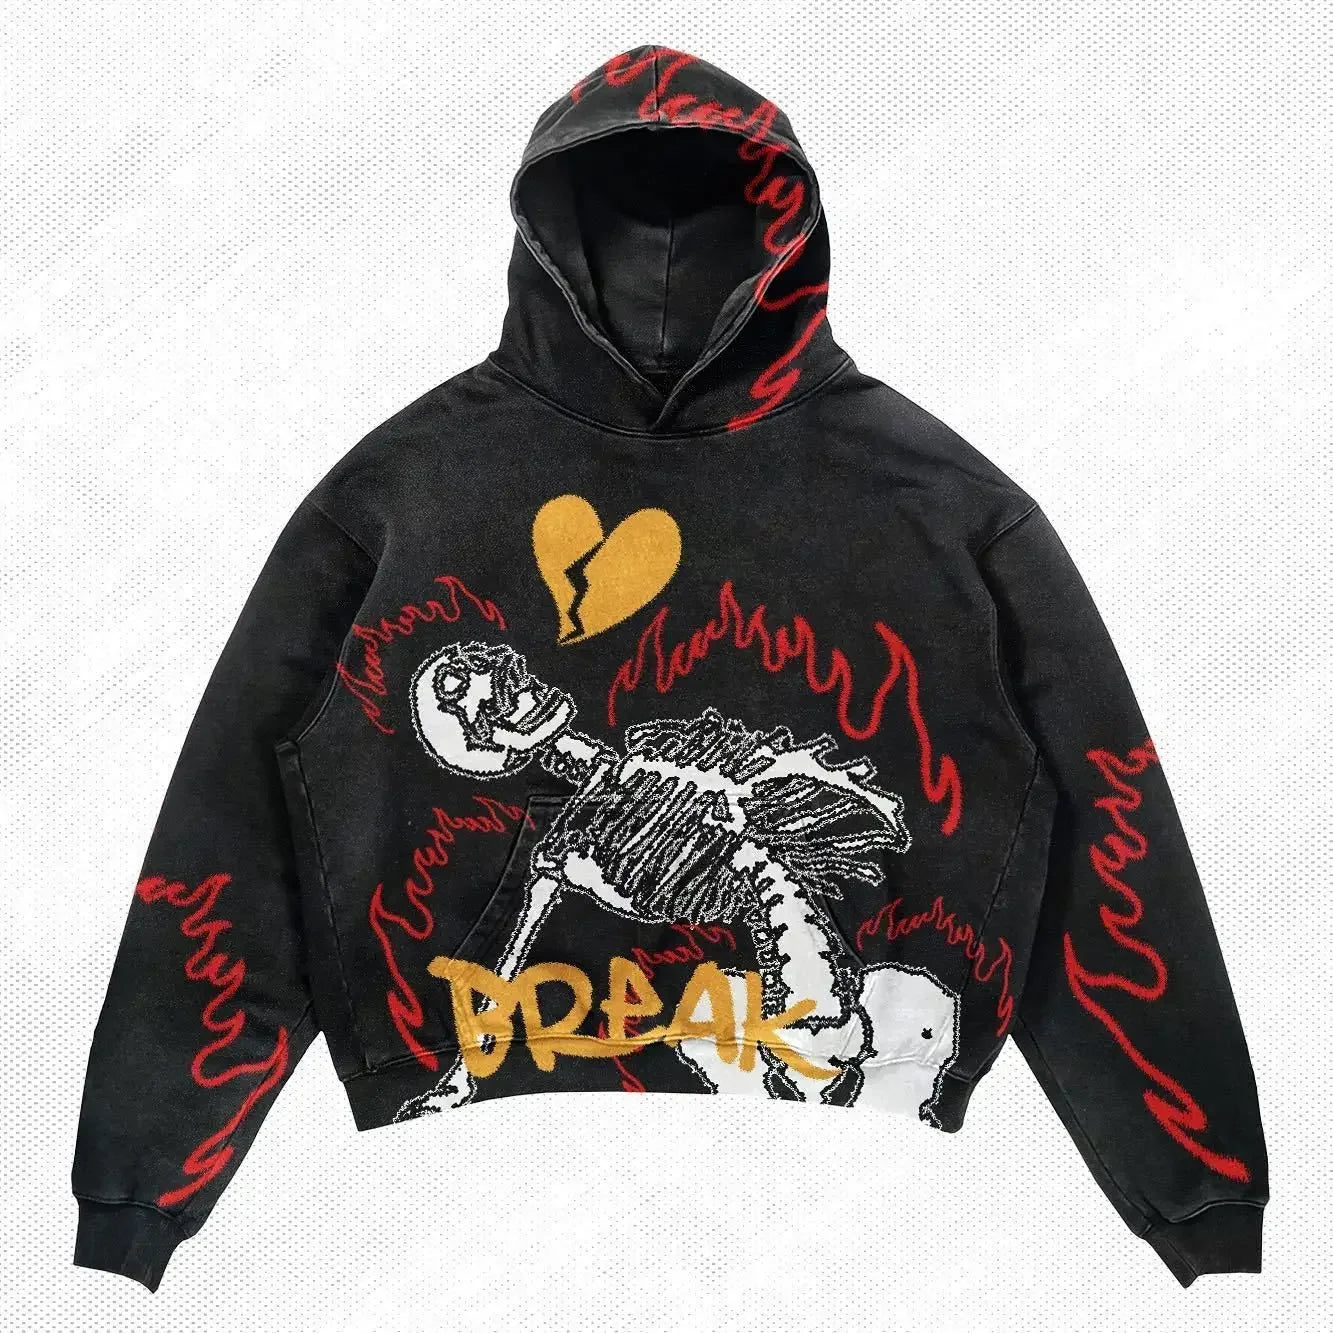 Maramalive™ Explosions Printed Skull Y2K Retro Hooded Sweater Coat Street Style Gothic Casual Fashion Hooded Sweater Men's Female with red flame graphics, a skeleton with a broken heart, and the word "BREAK" in yellow. Perfect for those who love punk style hoodies suitable for all four seasons.